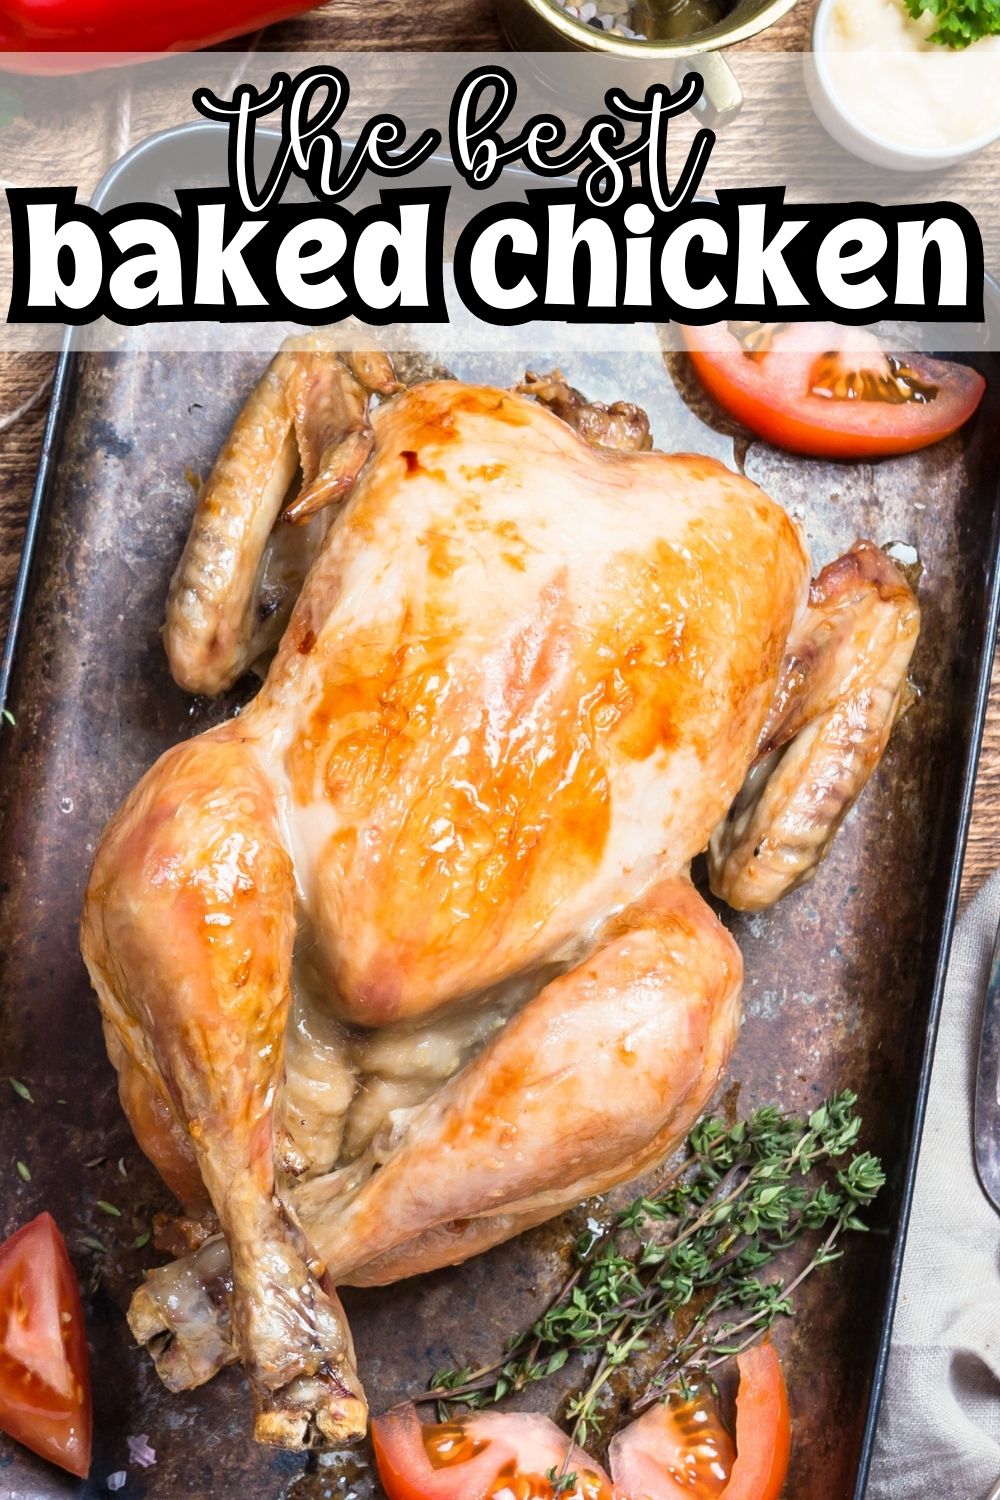 the best baked chicken BBQ Pulled Chicken Dutch Oven Recipe Savor the ultimate BBQ Pulled Chicken Dutch Oven Recipe - tender, succulent chicken bathed in tangy BBQ sauce, slow-cooked to perfection! 🔥🍗 Discover the convenience of Dutch oven cooking and indulge in this finger-licking goodness for your next gathering or family meal. #BBQRecipes #DutchOvenCooking #PulledChickenDelight"